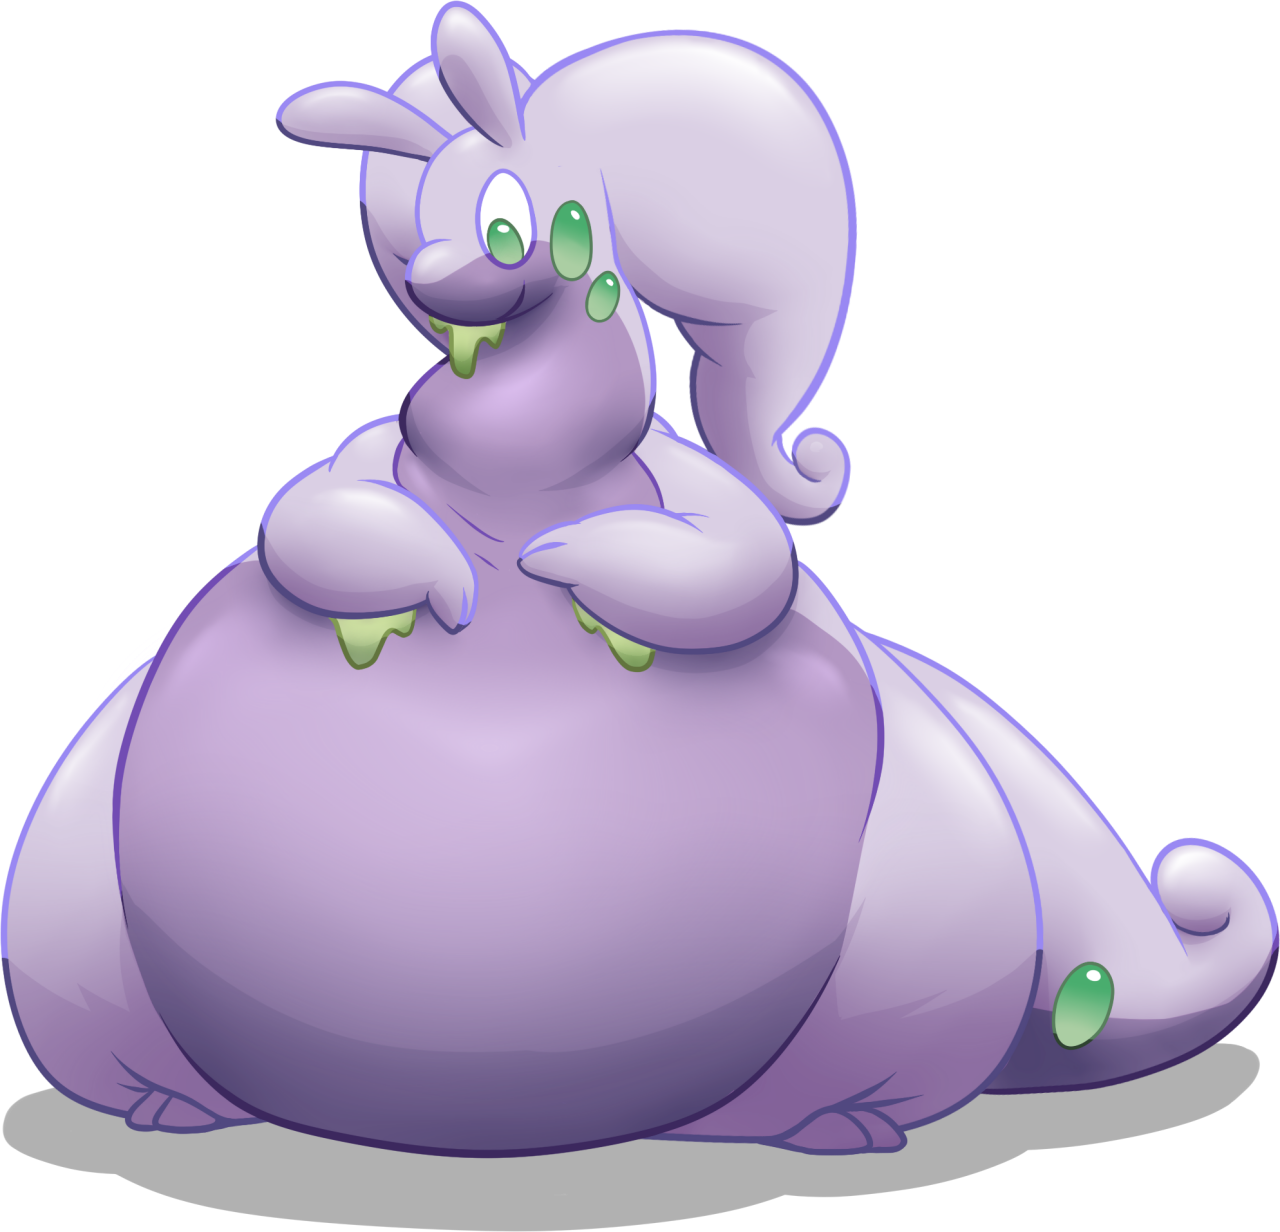 View Hunnybeen , - Goodra Fat Clipart - Large Size Png Image - PikPng.